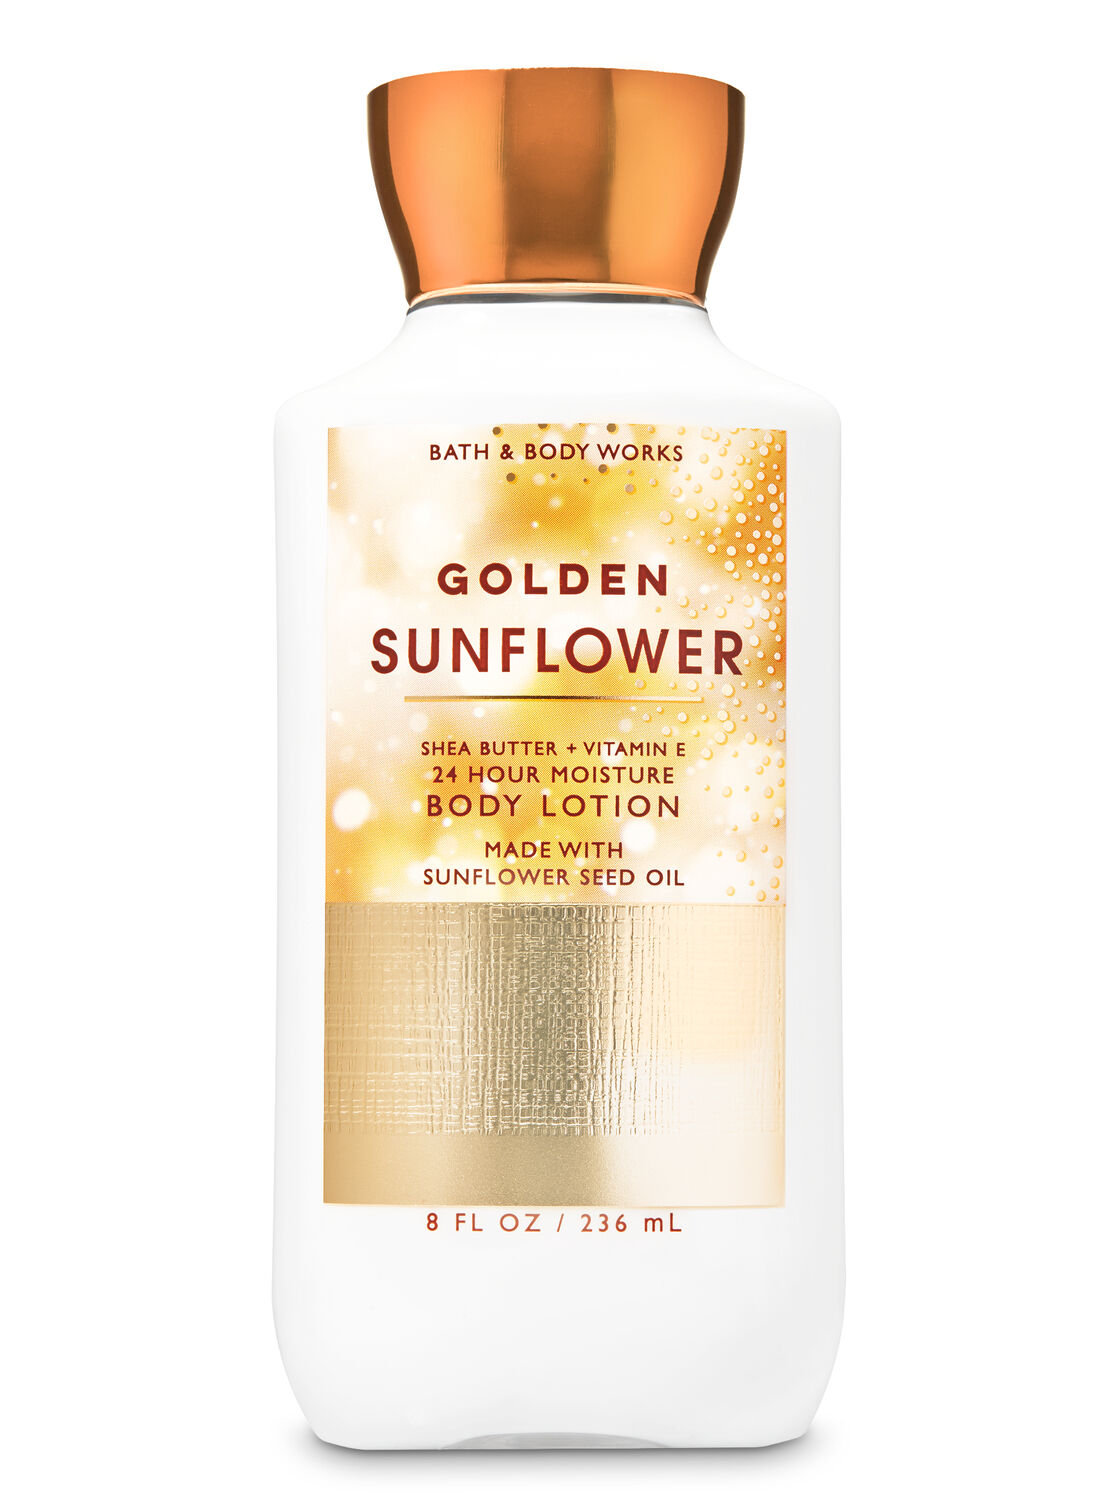 Golden Sunflower Super Smooth Body Lotion